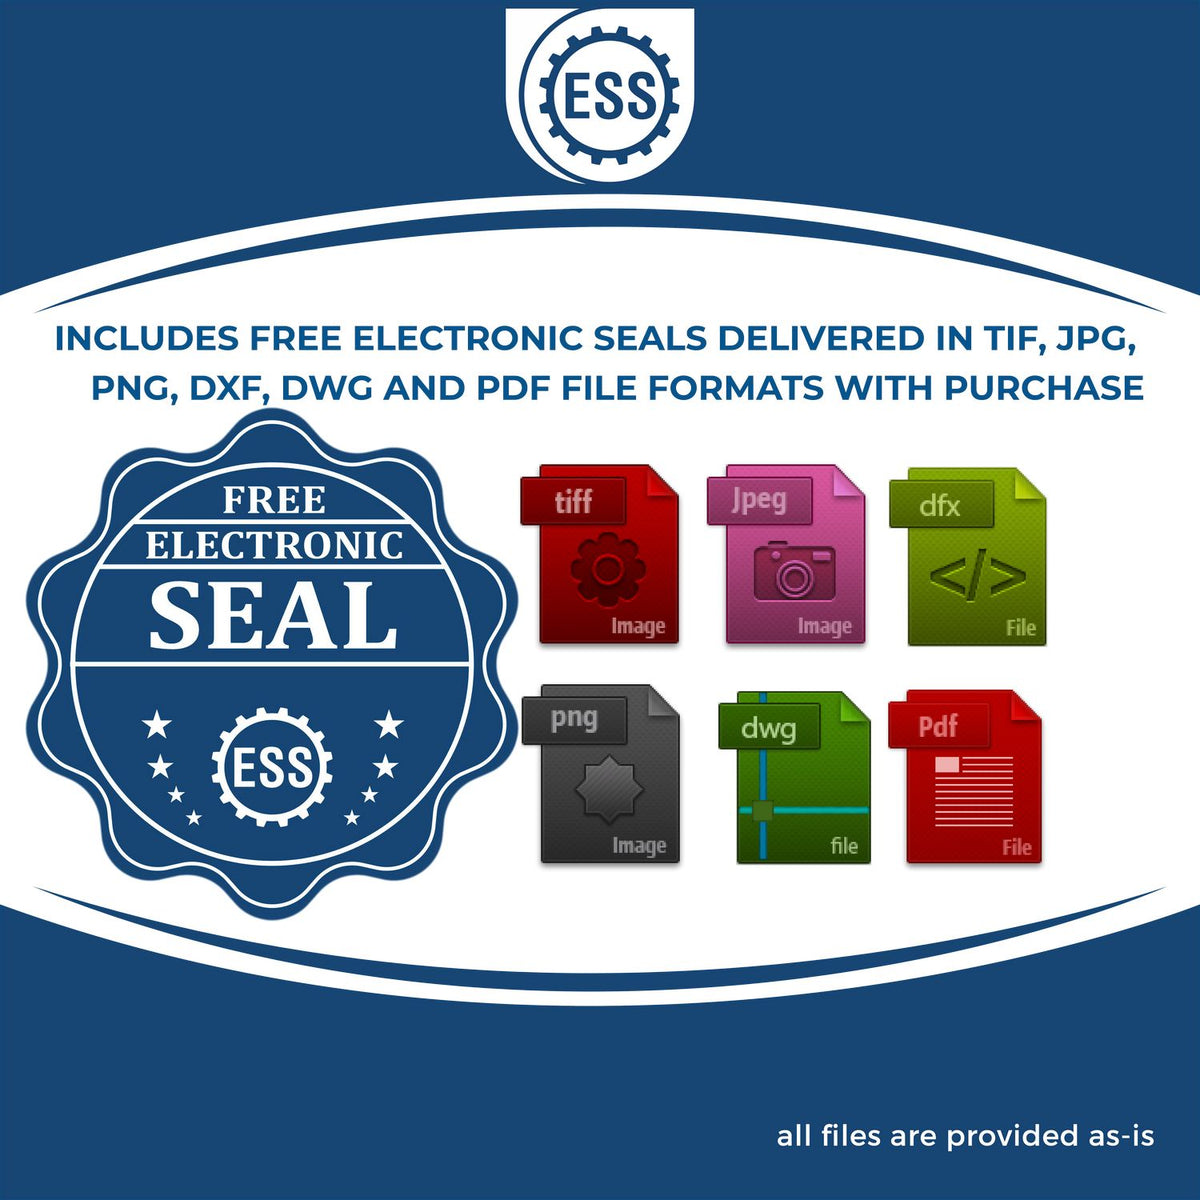 An infographic for the free electronic seal for the Extended Long Reach New York Architect Seal Embosser illustrating the different file type icons such as DXF, DWG, TIF, JPG and PNG.